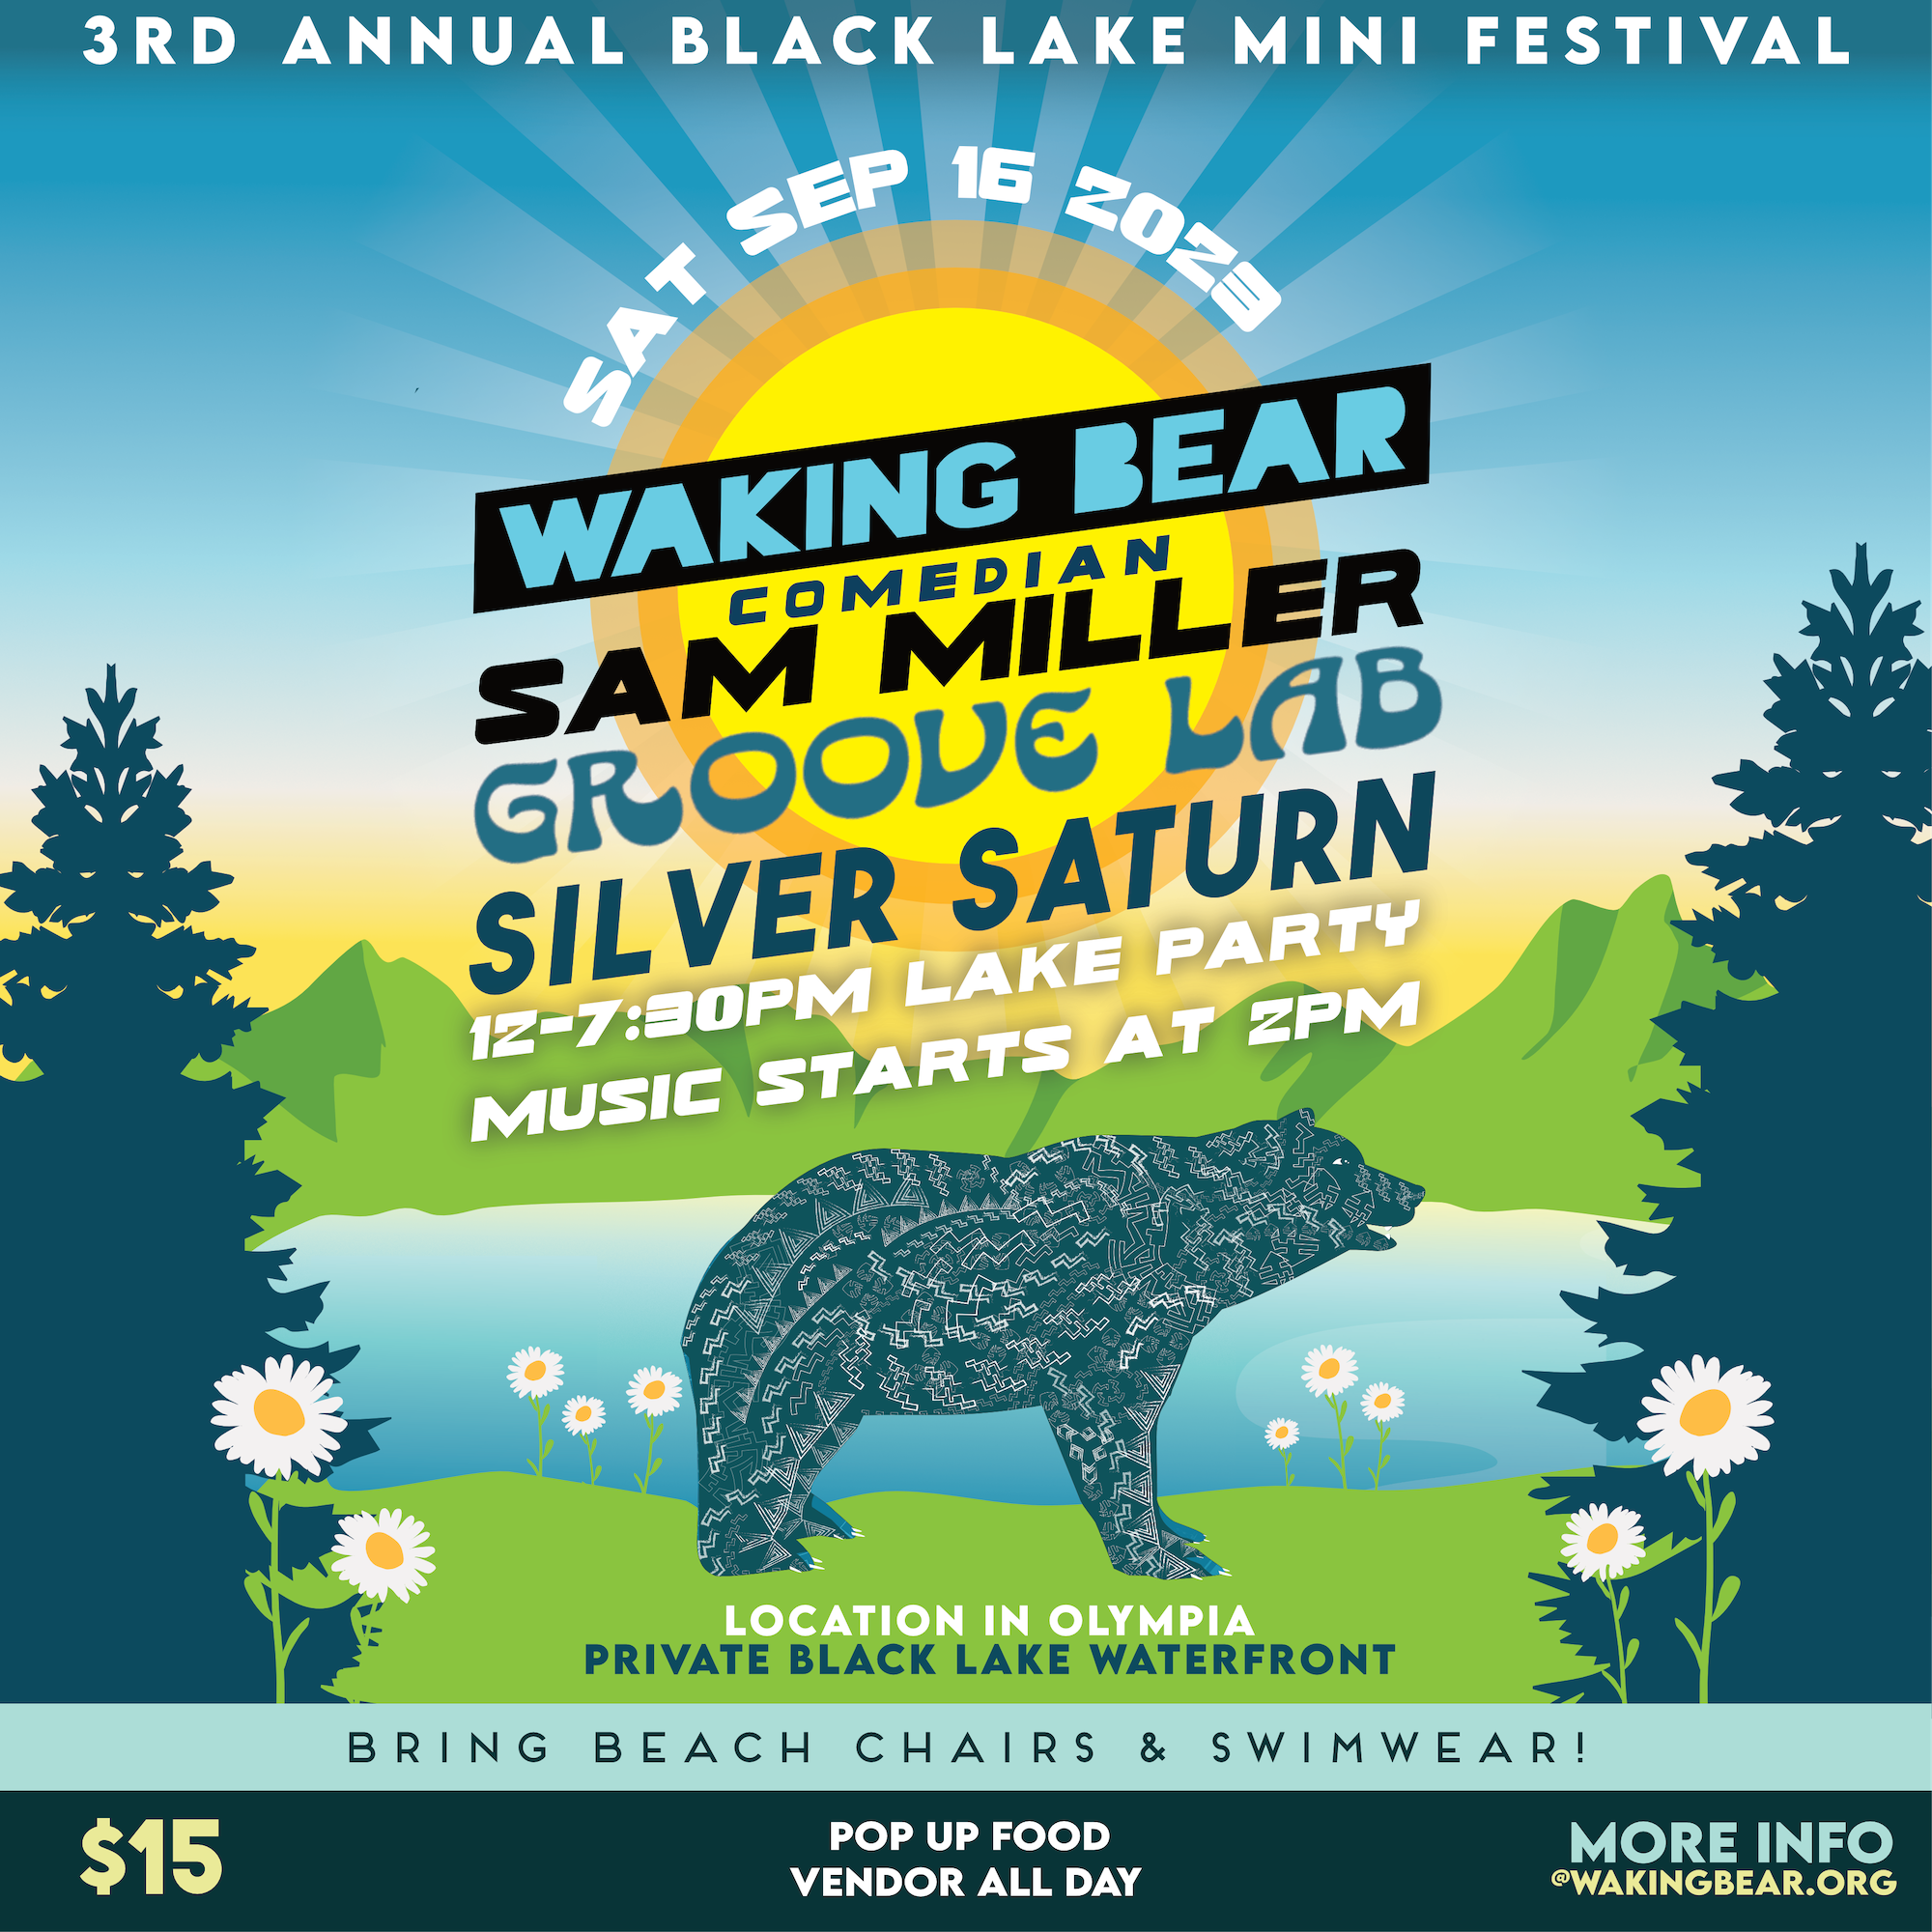 3rd Annual Black Lake Mini Festival – Elevator Operator, Groove Lab & Silver Saturn AND Special Guest, Comedian Sam Miller!